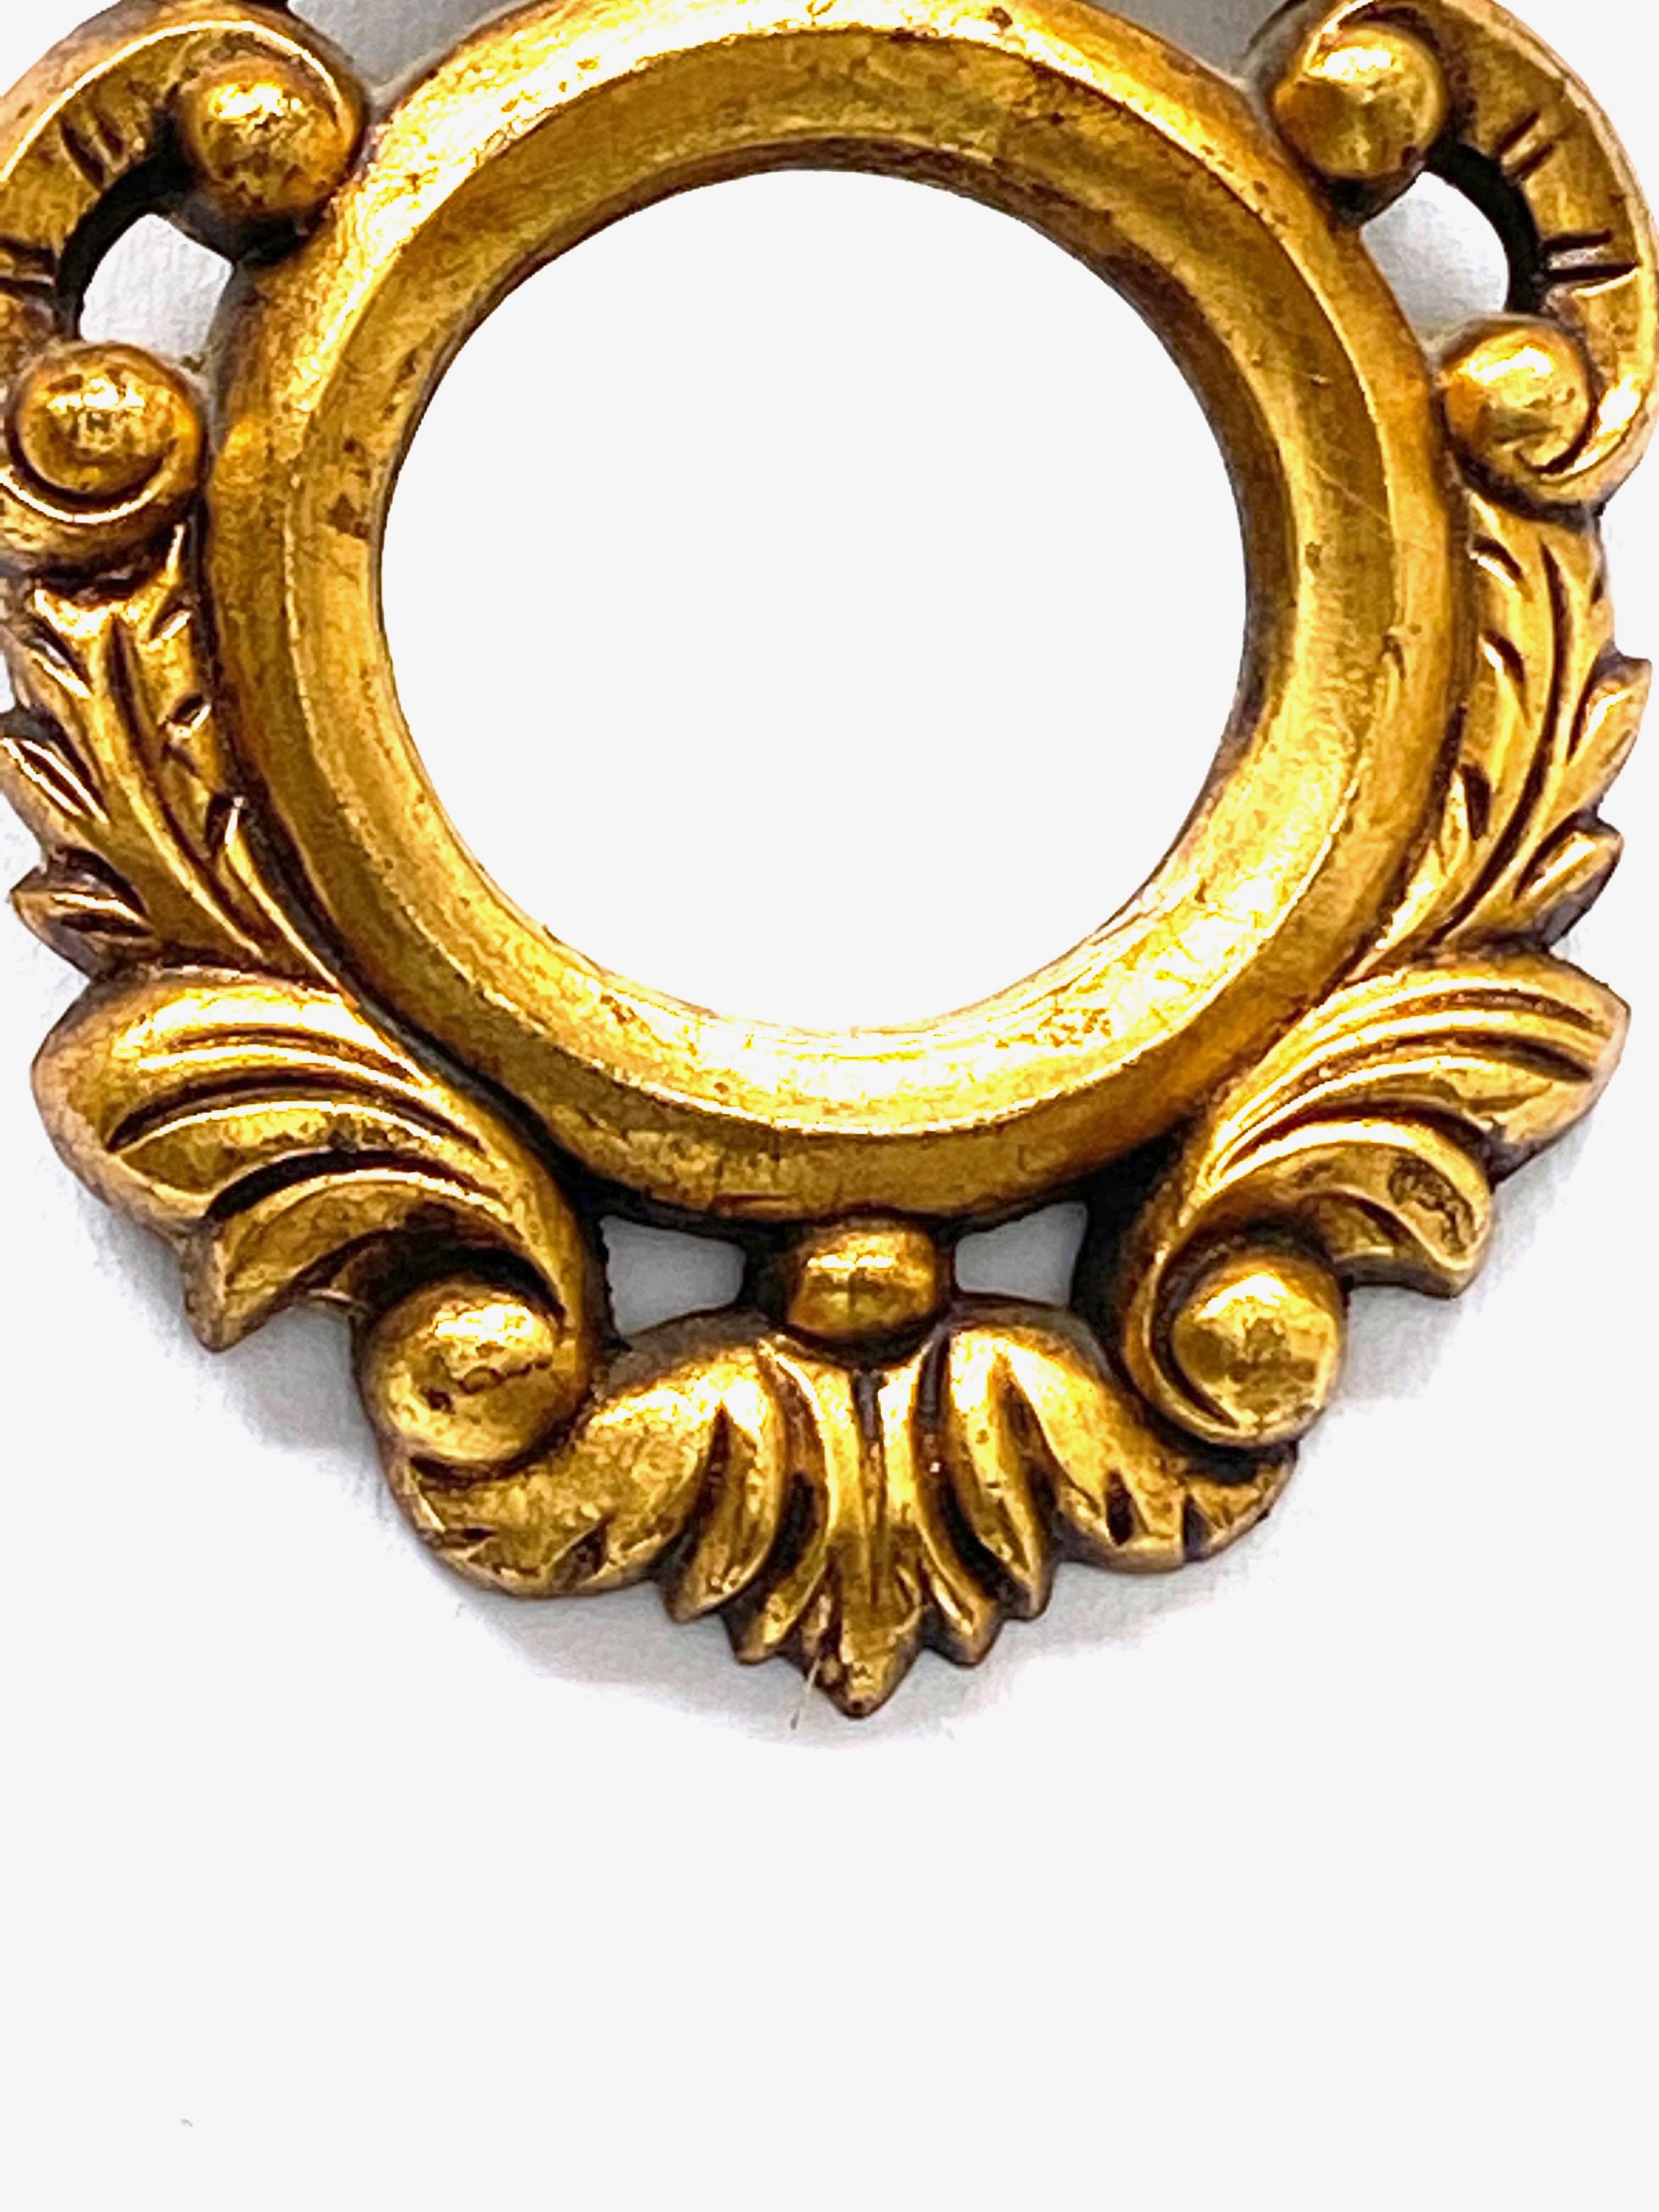 Hollywood Regency Petite Italian Tole Toleware Gilded Framed Mirror, circa 1960s For Sale